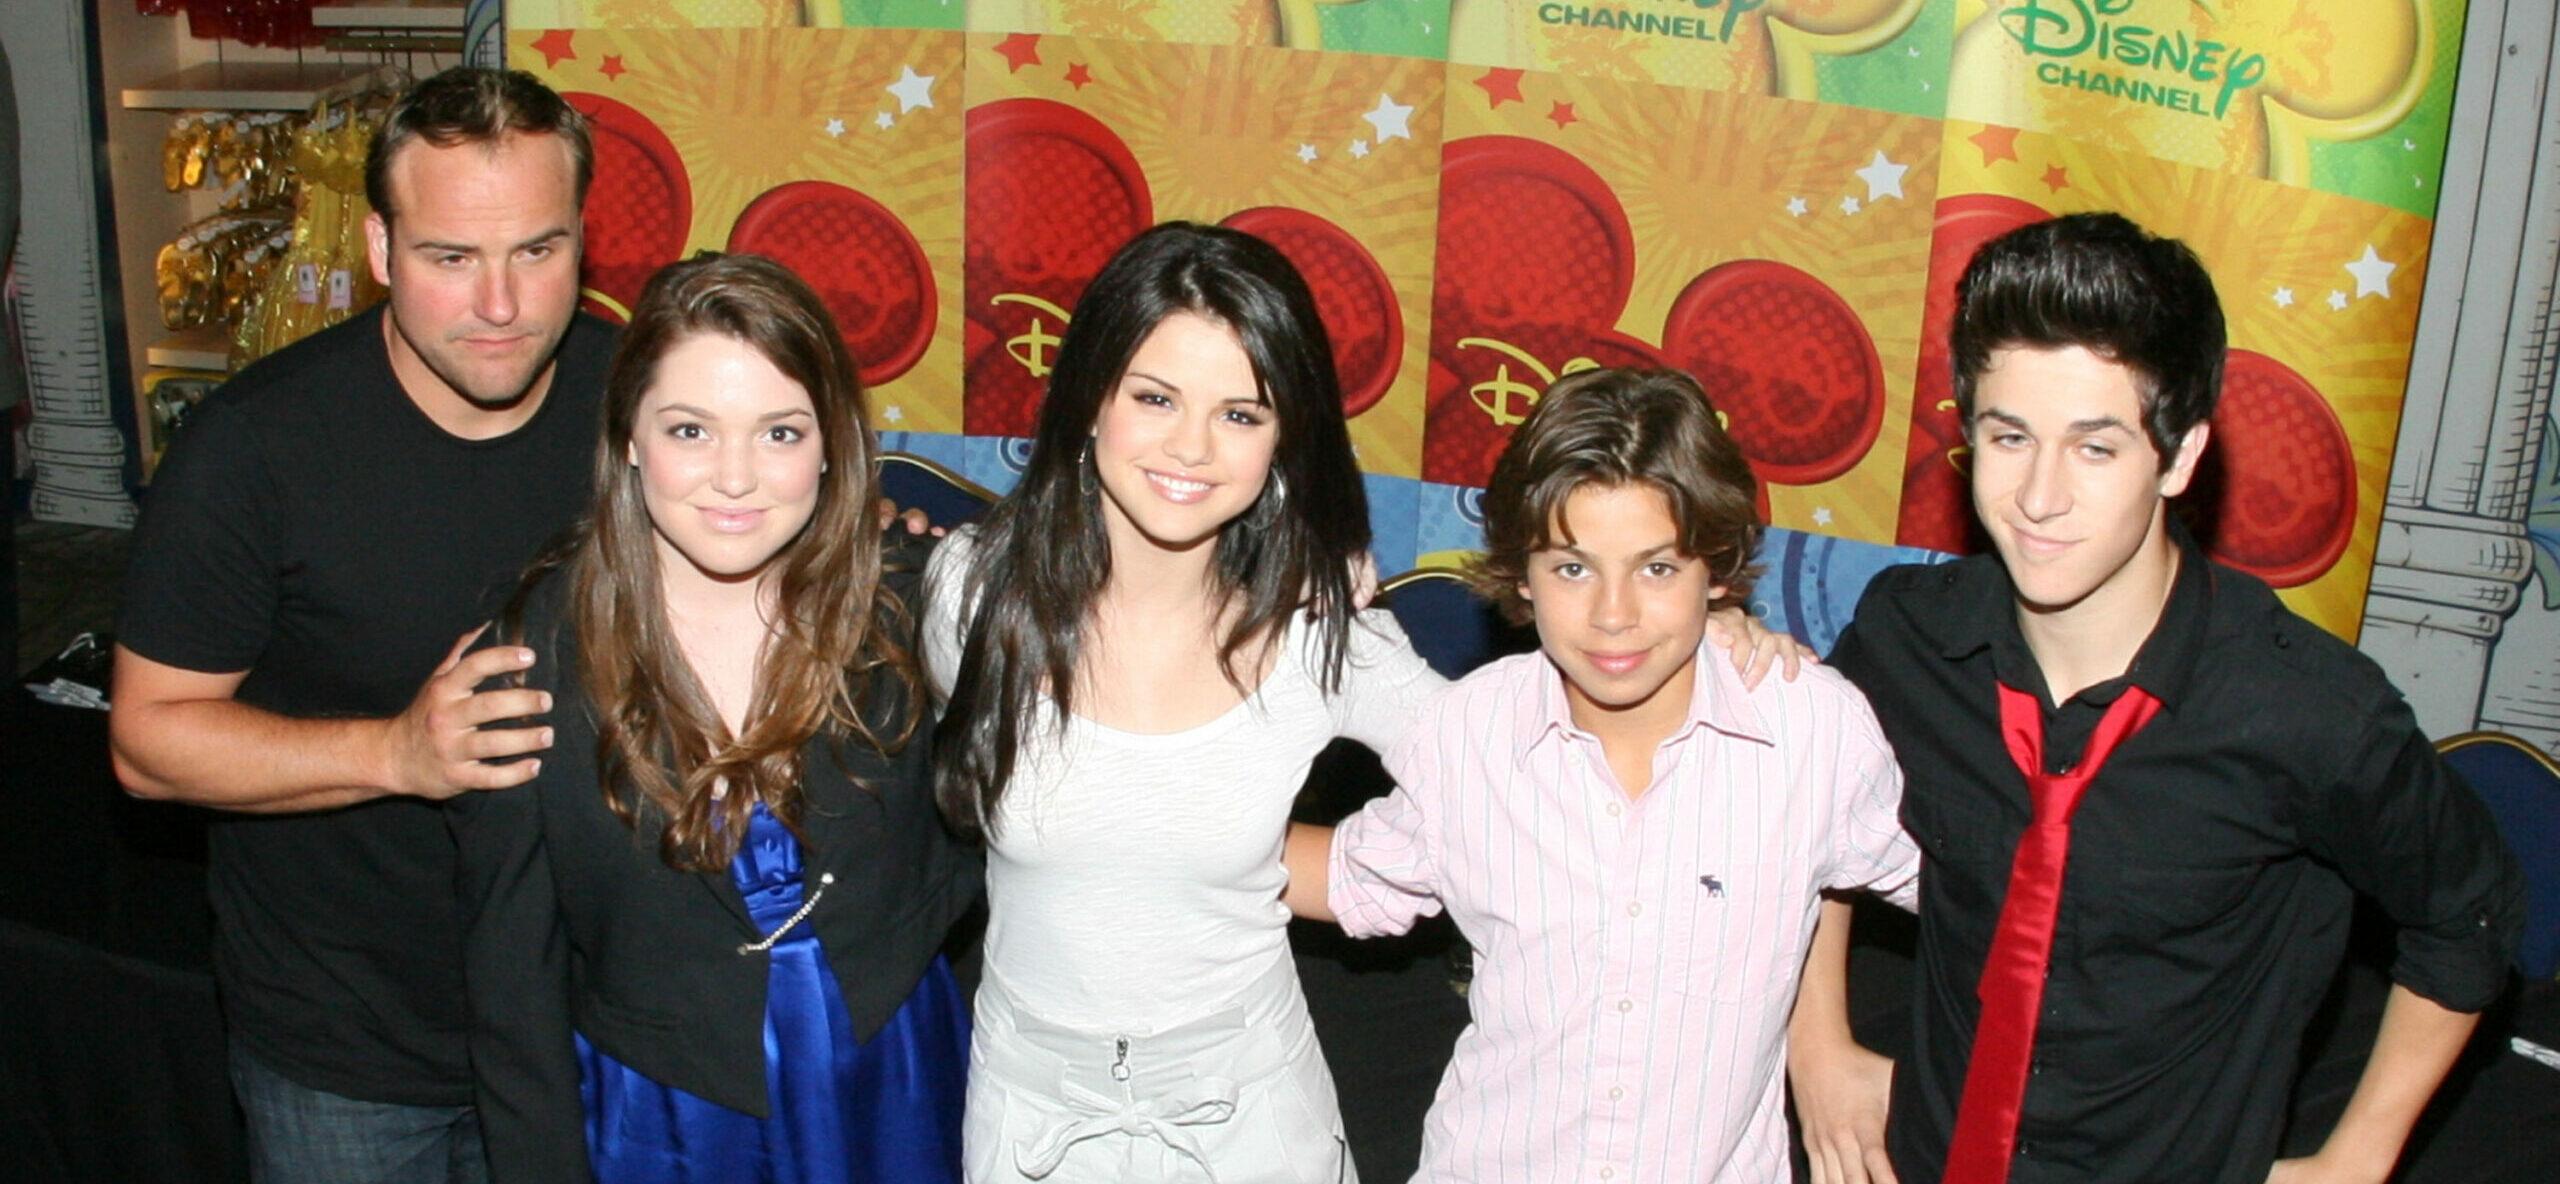 wizards of waverly place cast